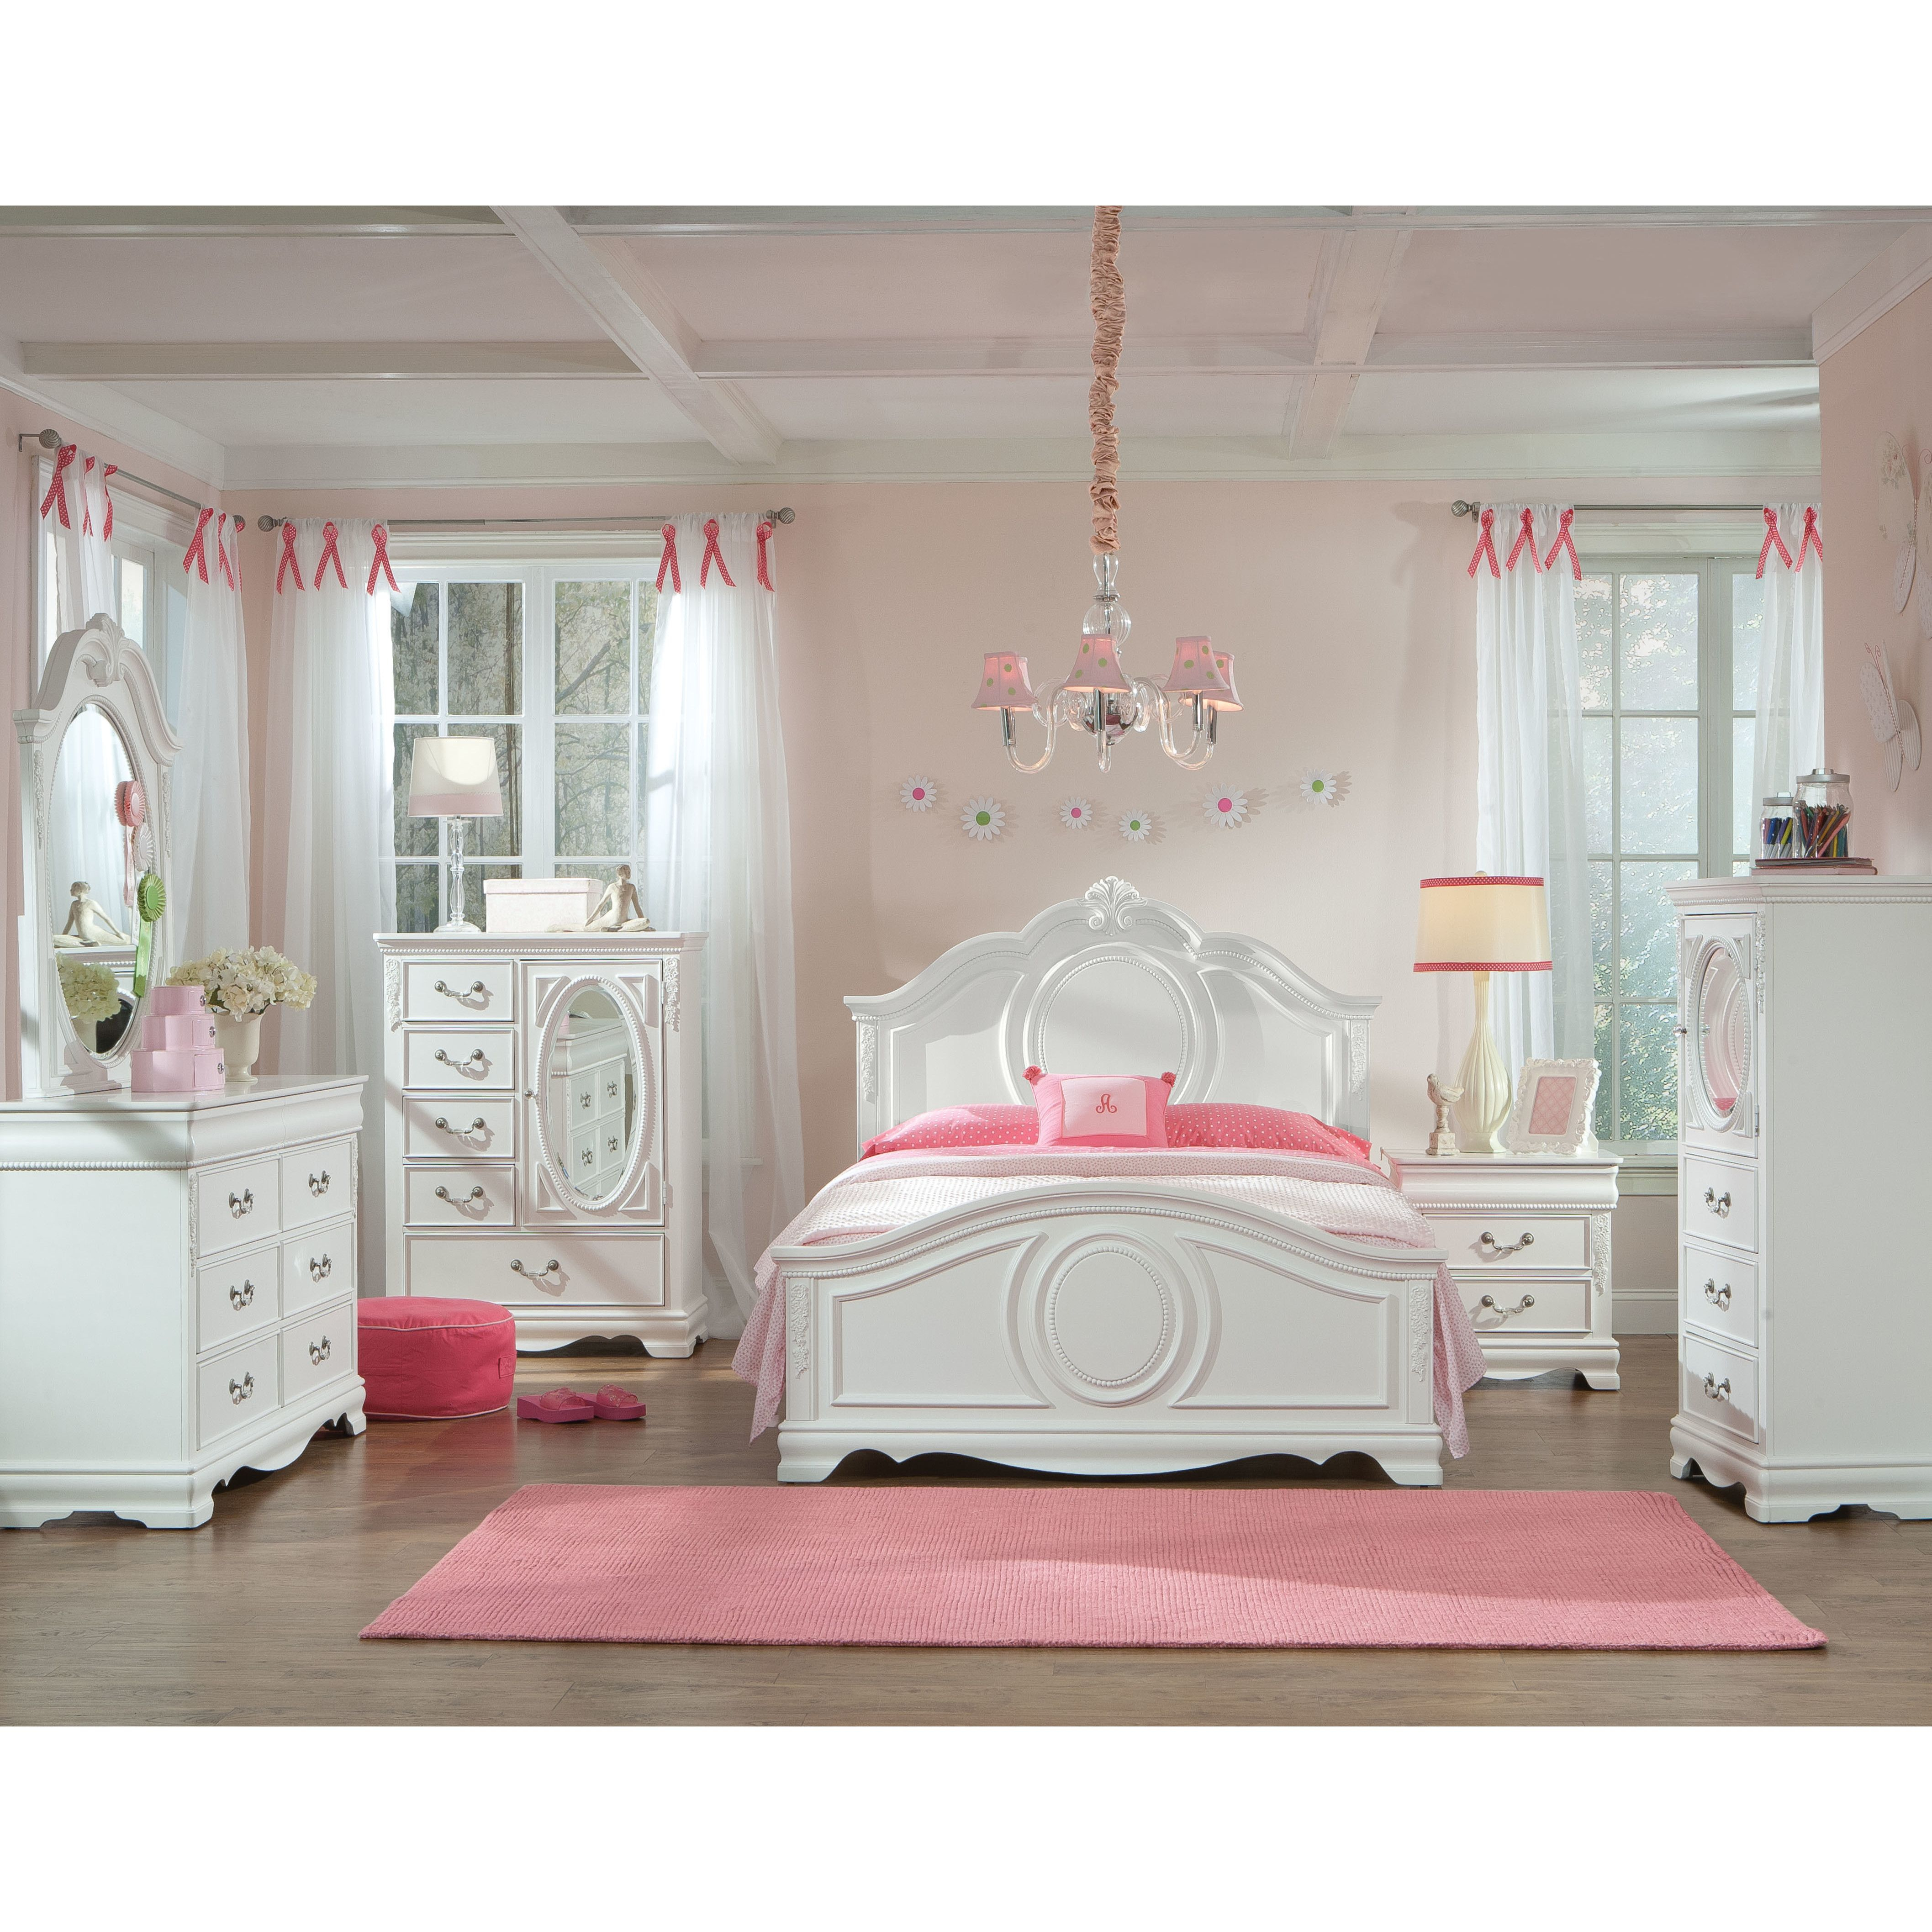 Incredible Brilliant Full Bedroom Sets For Girls Learning regarding dimensions 4230 X 4230